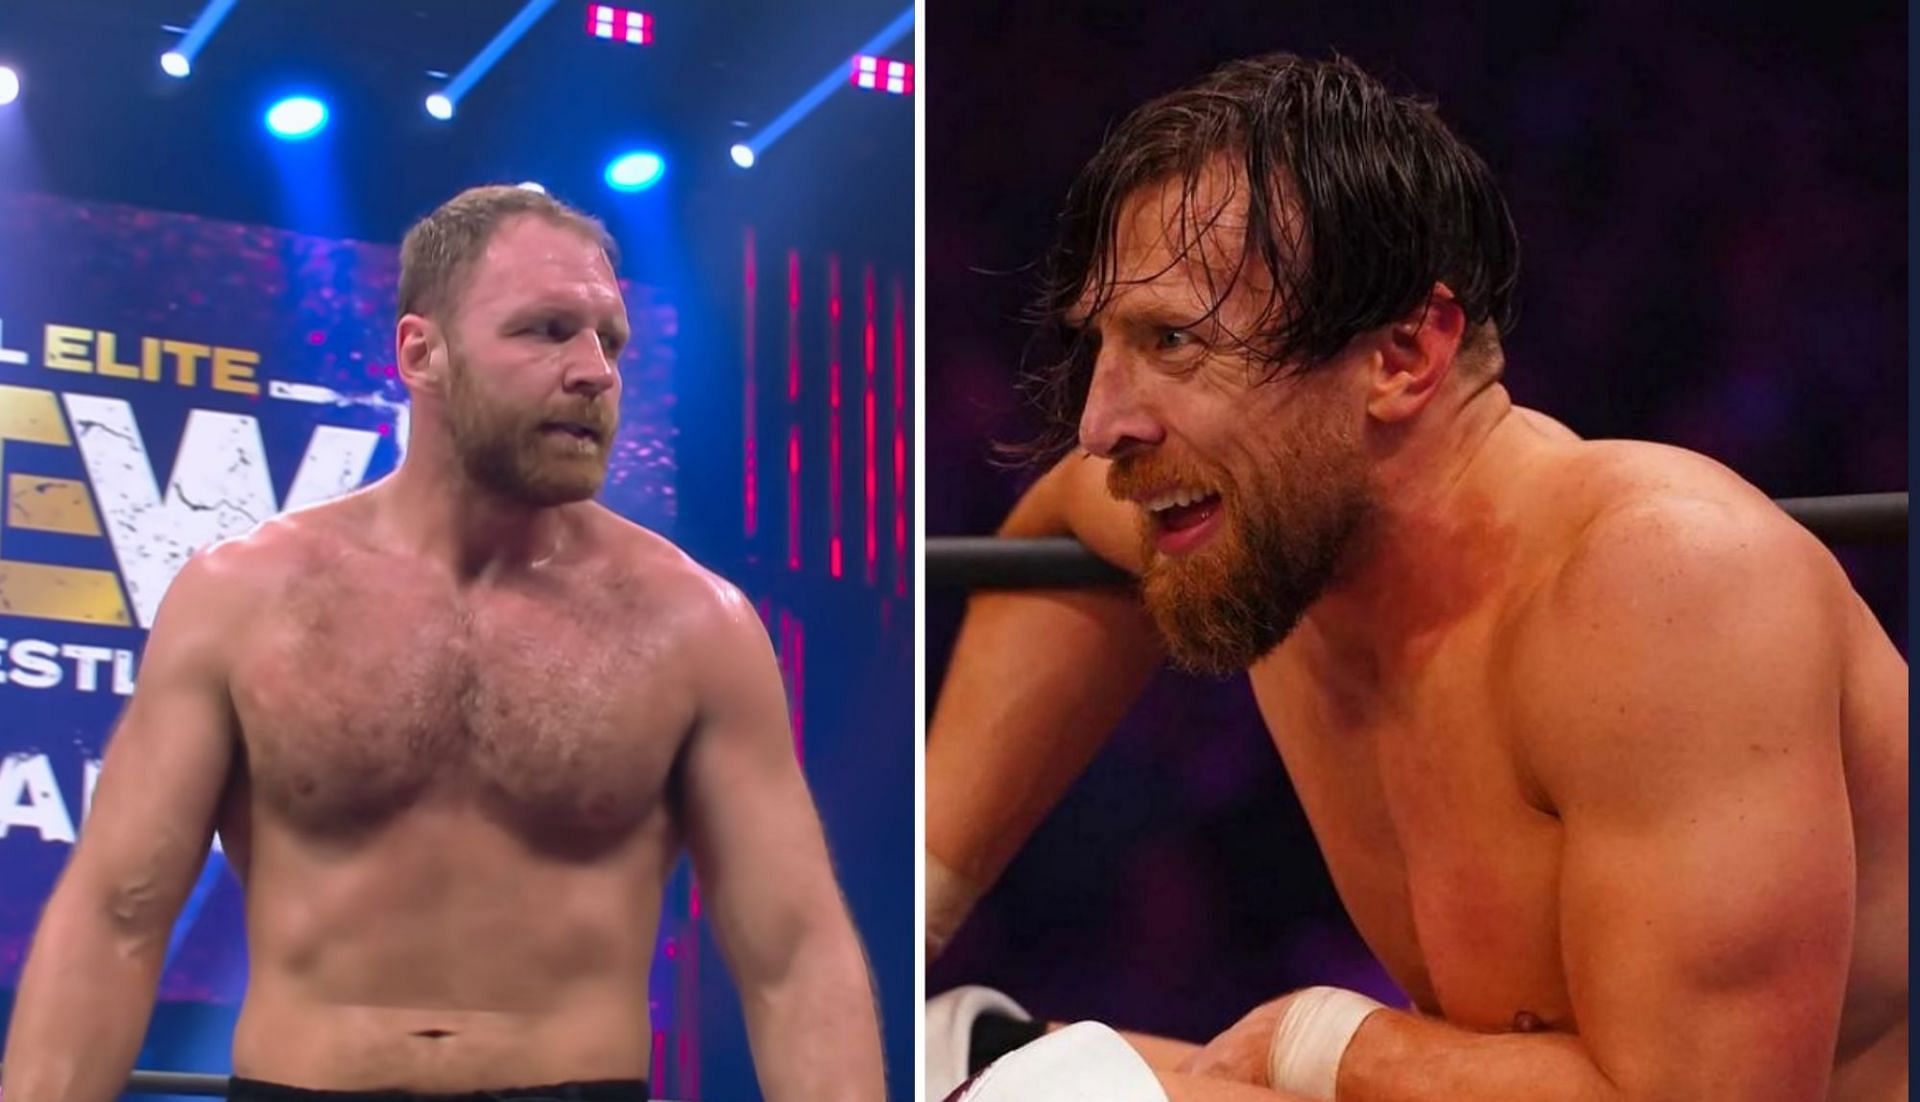 Will Bryan Danielson stick with Jon Moxley till the end?